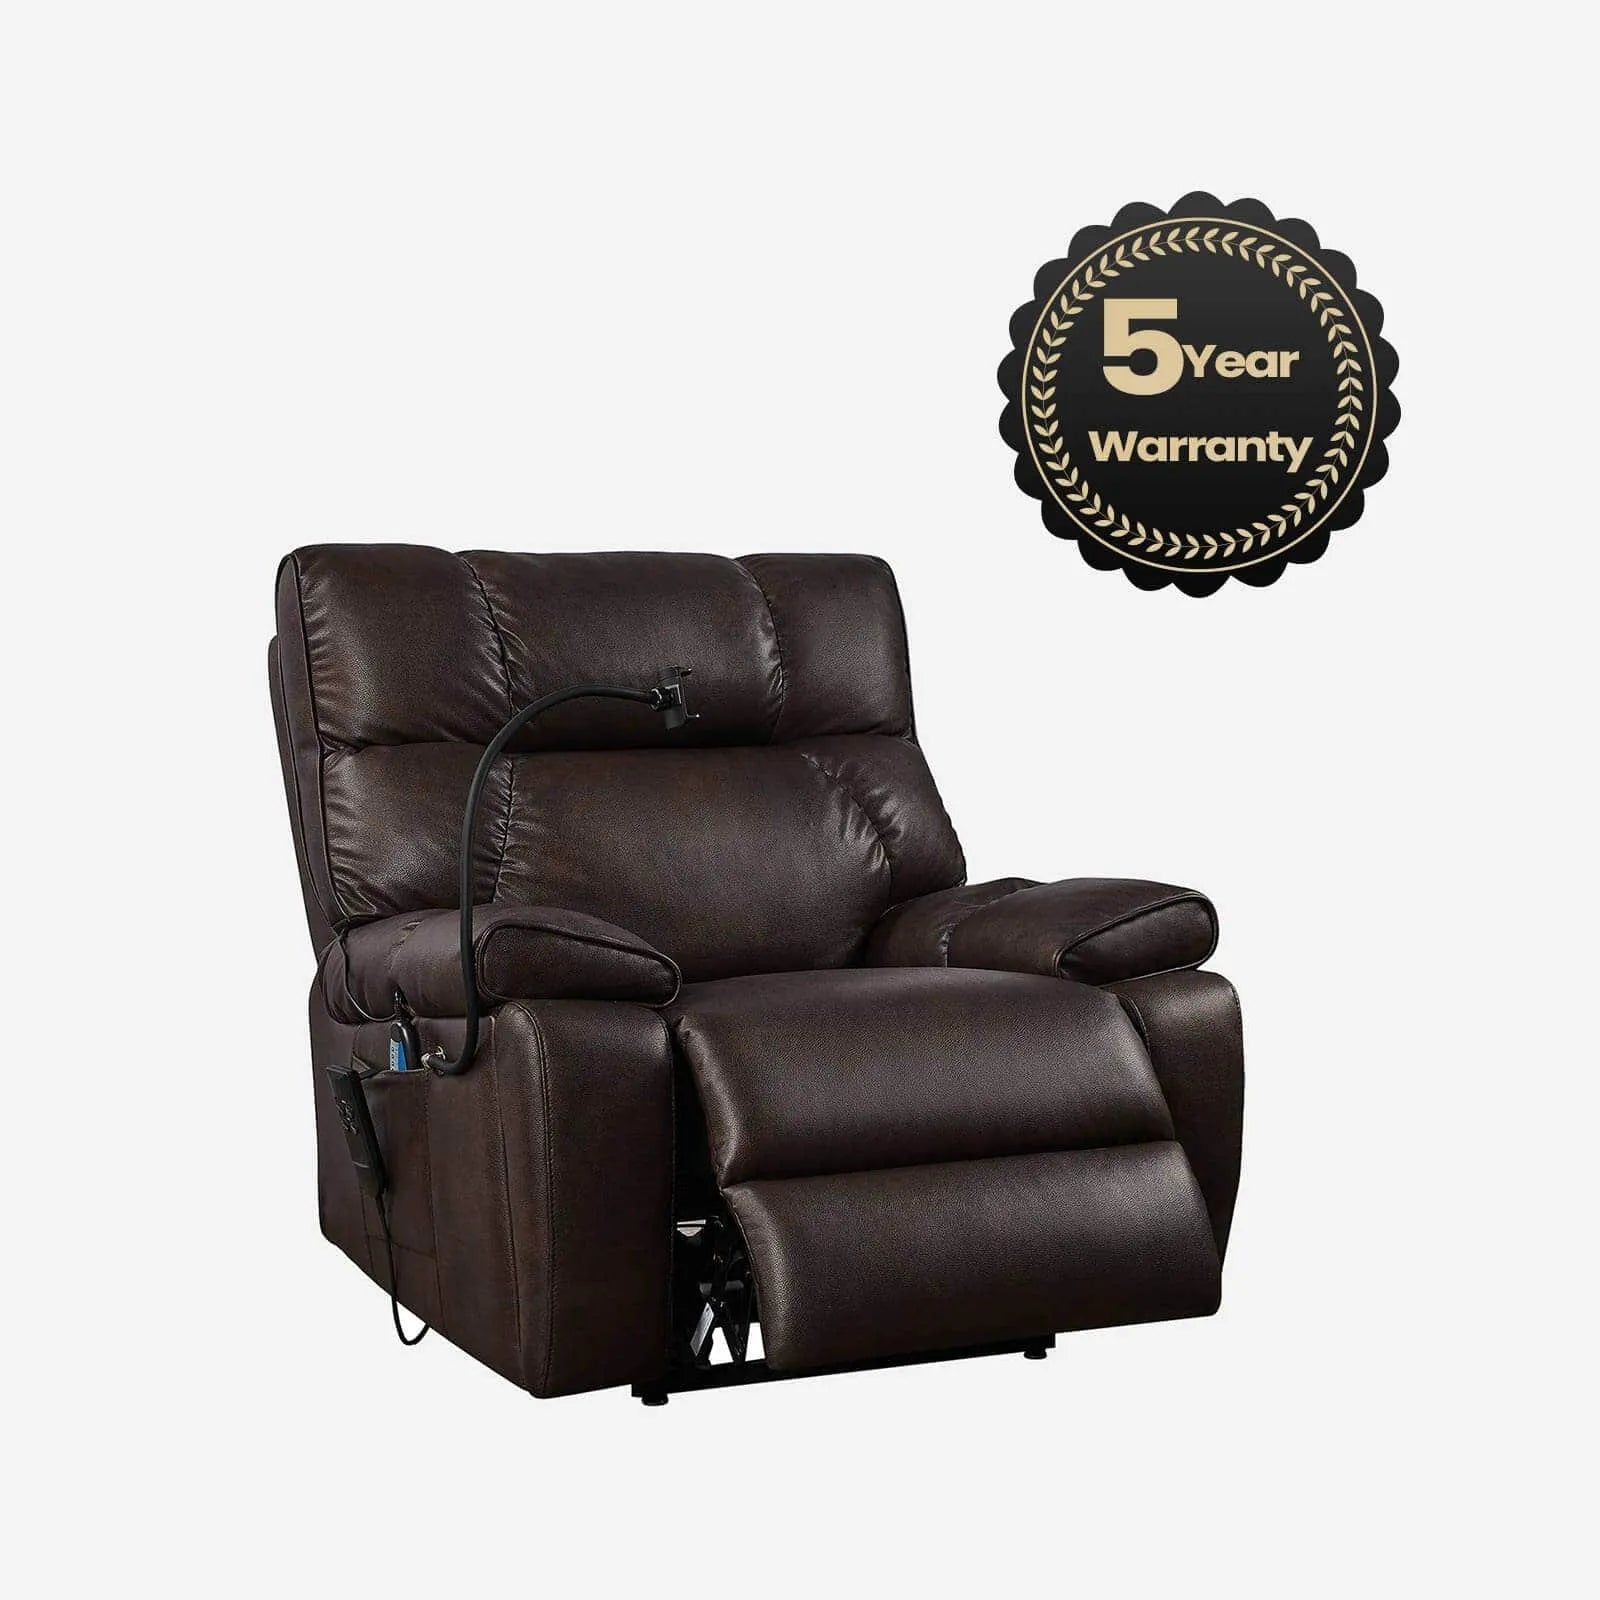 infinite position lift recliner chair with 5 year warranty